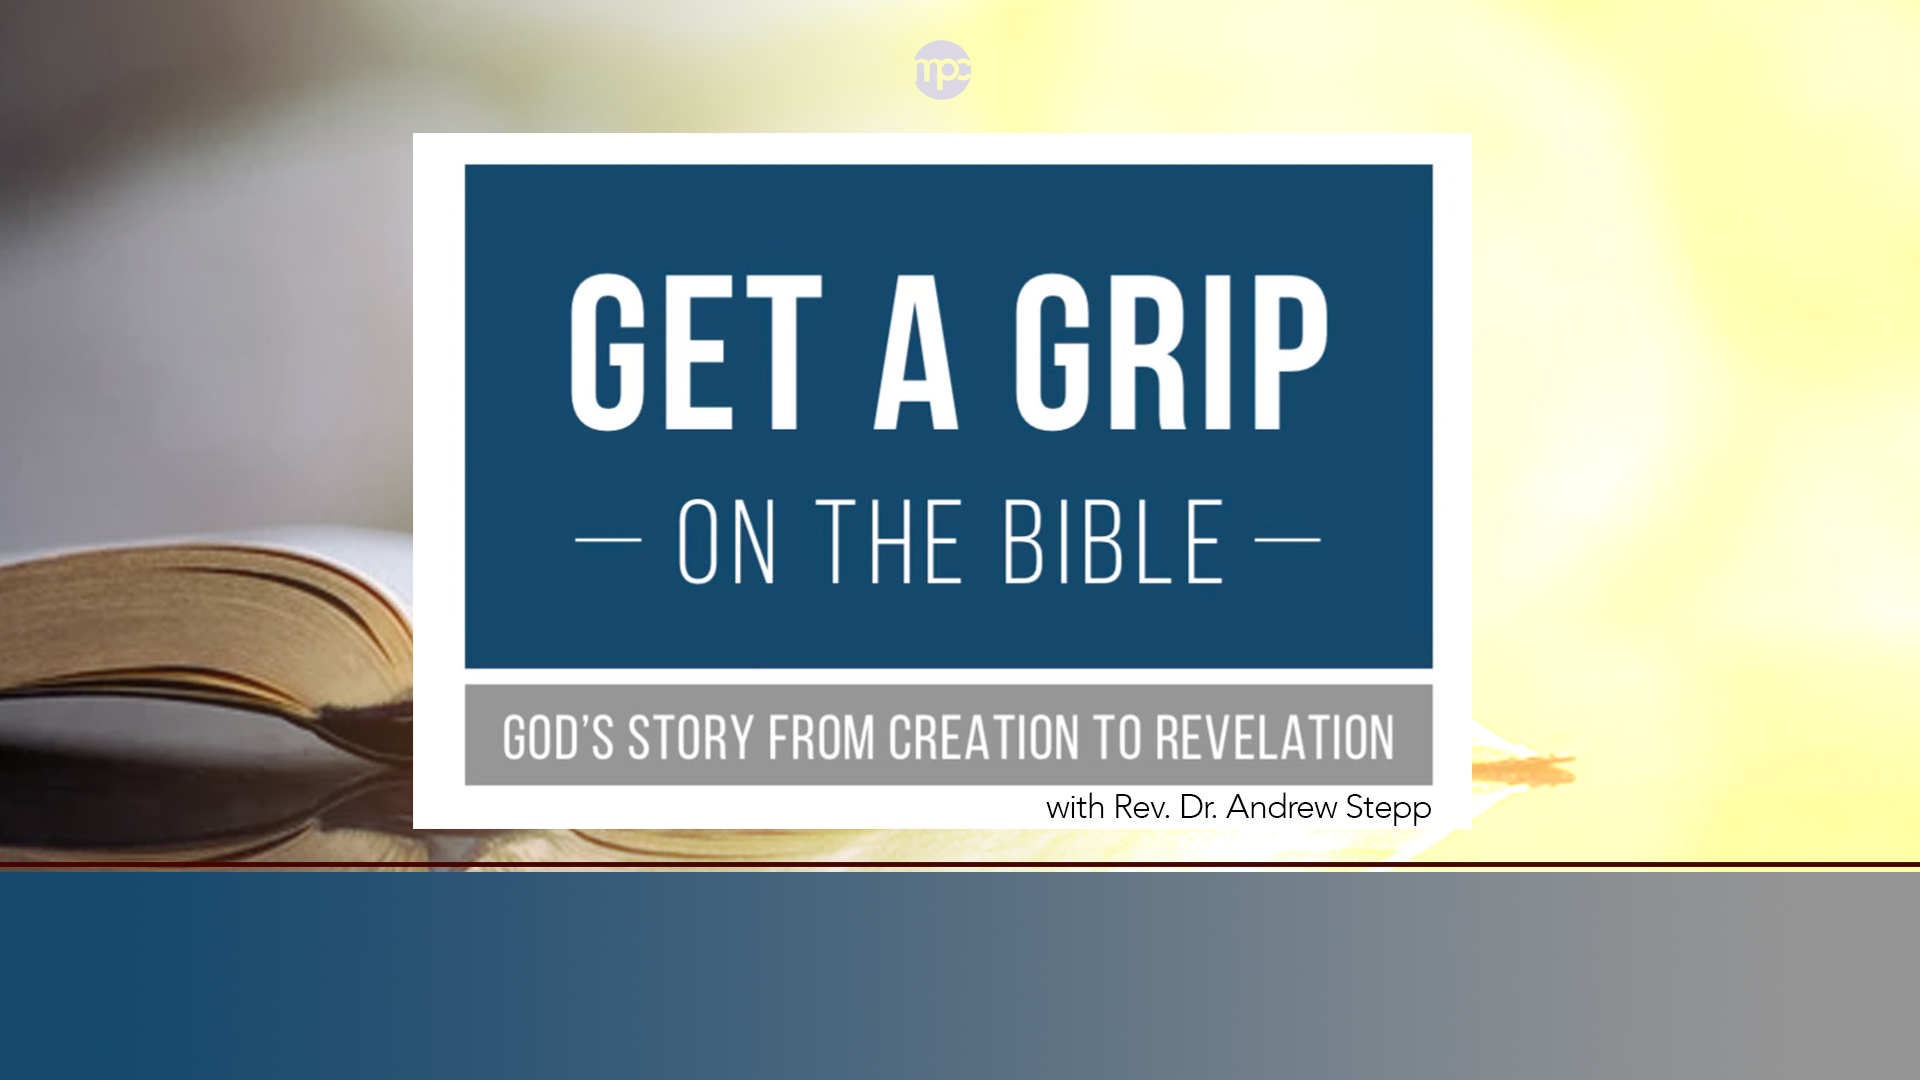 'Get A Grip on the Bible' Class

A 10-week class that walks through the redemption story from Creation to Revelation, chronicling the themes and major events of Biblical history. 
